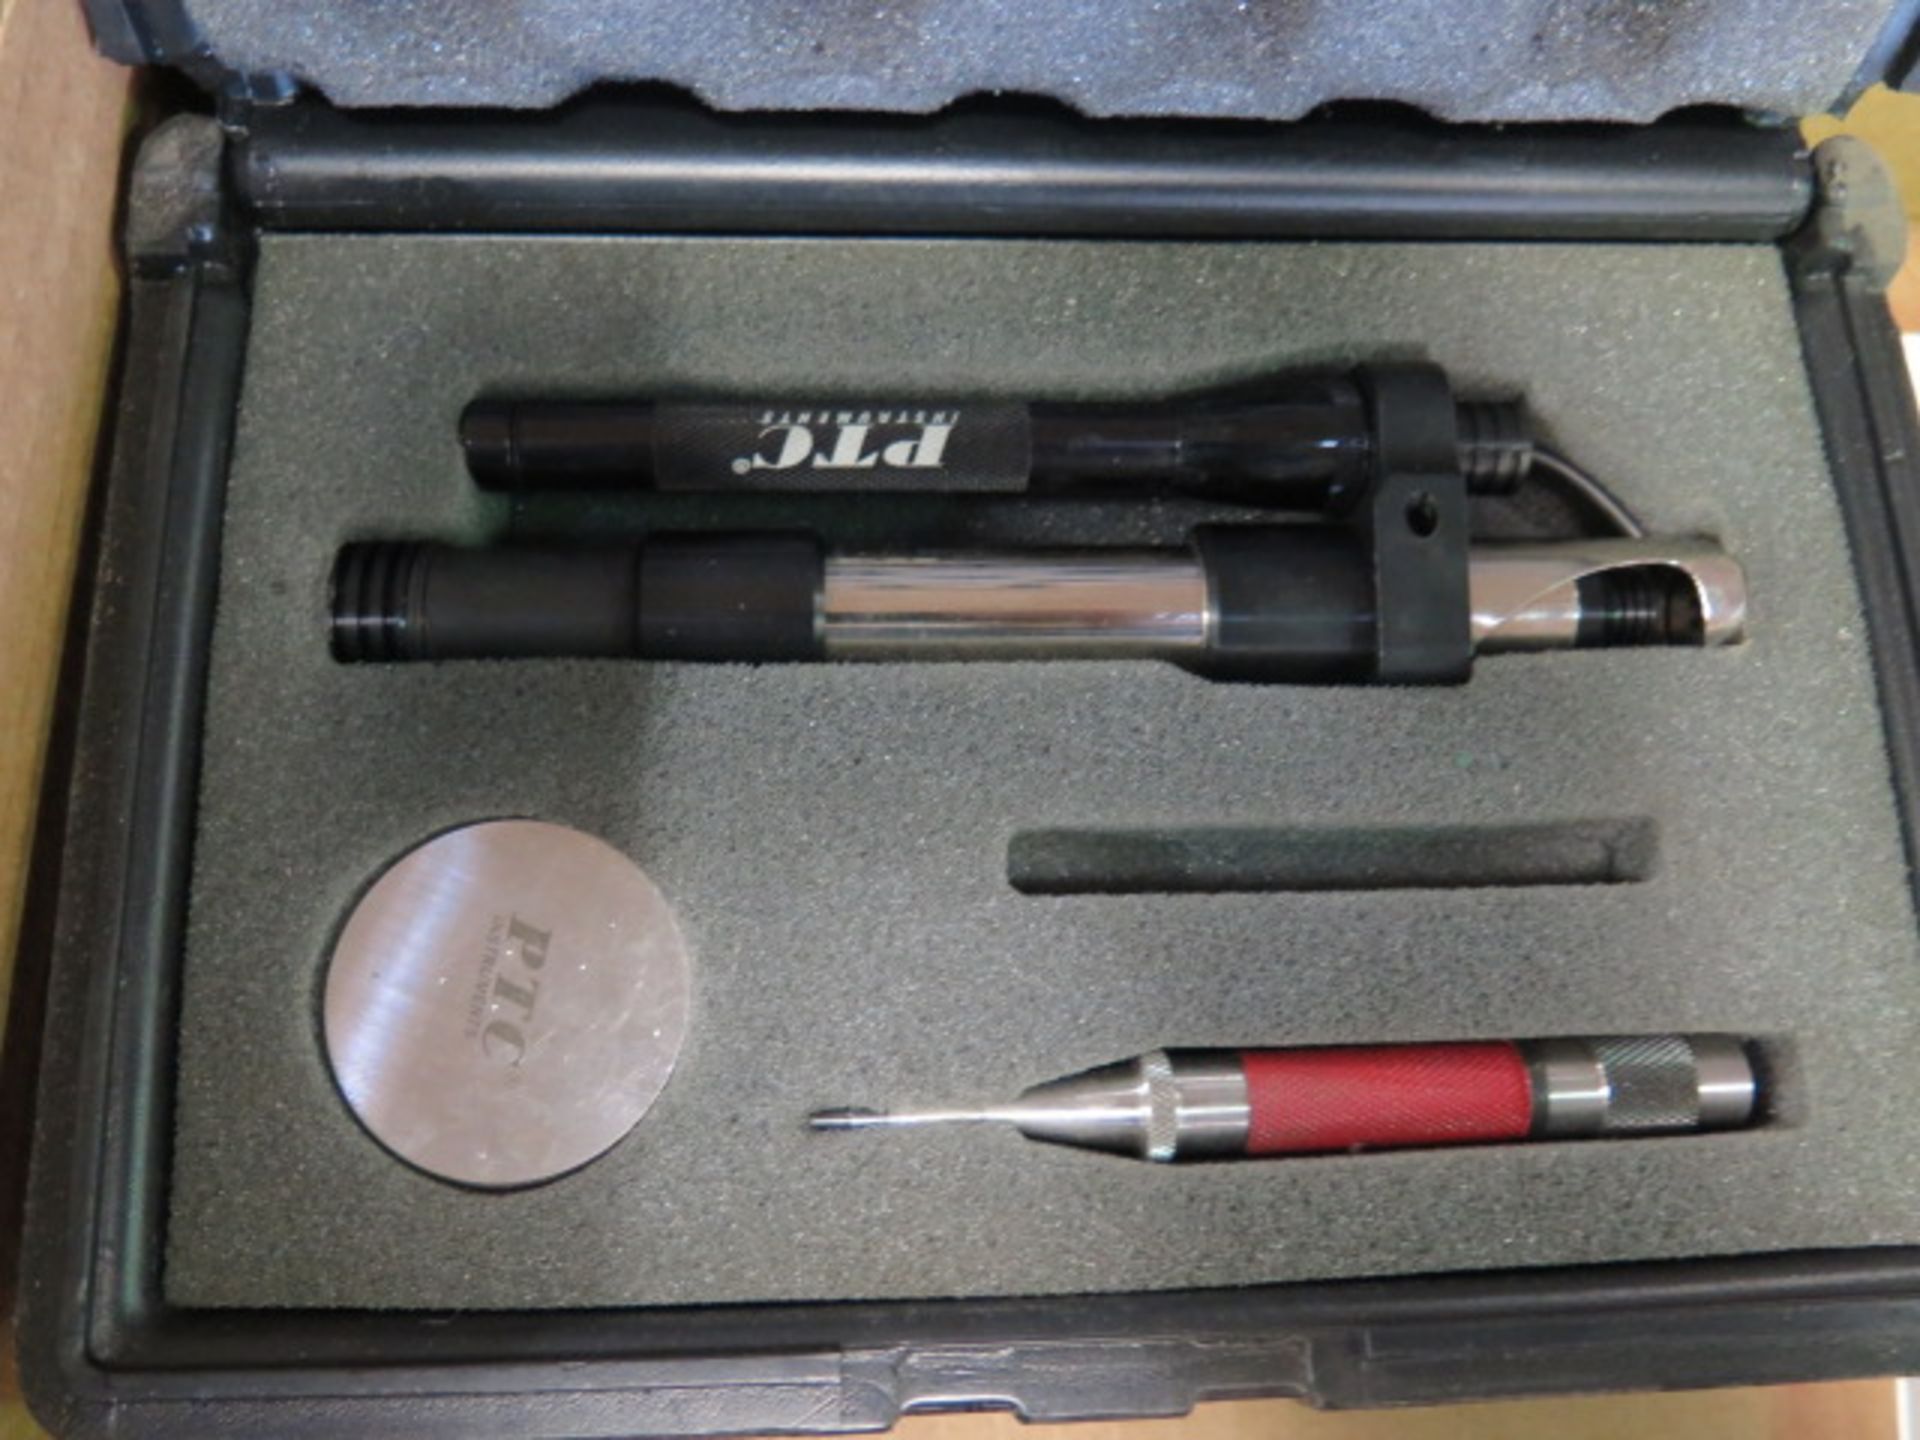 PTS mdl. 316 Portable Hardness Tester (SOLD AS -IS - NO WARANTY) - Image 3 of 5